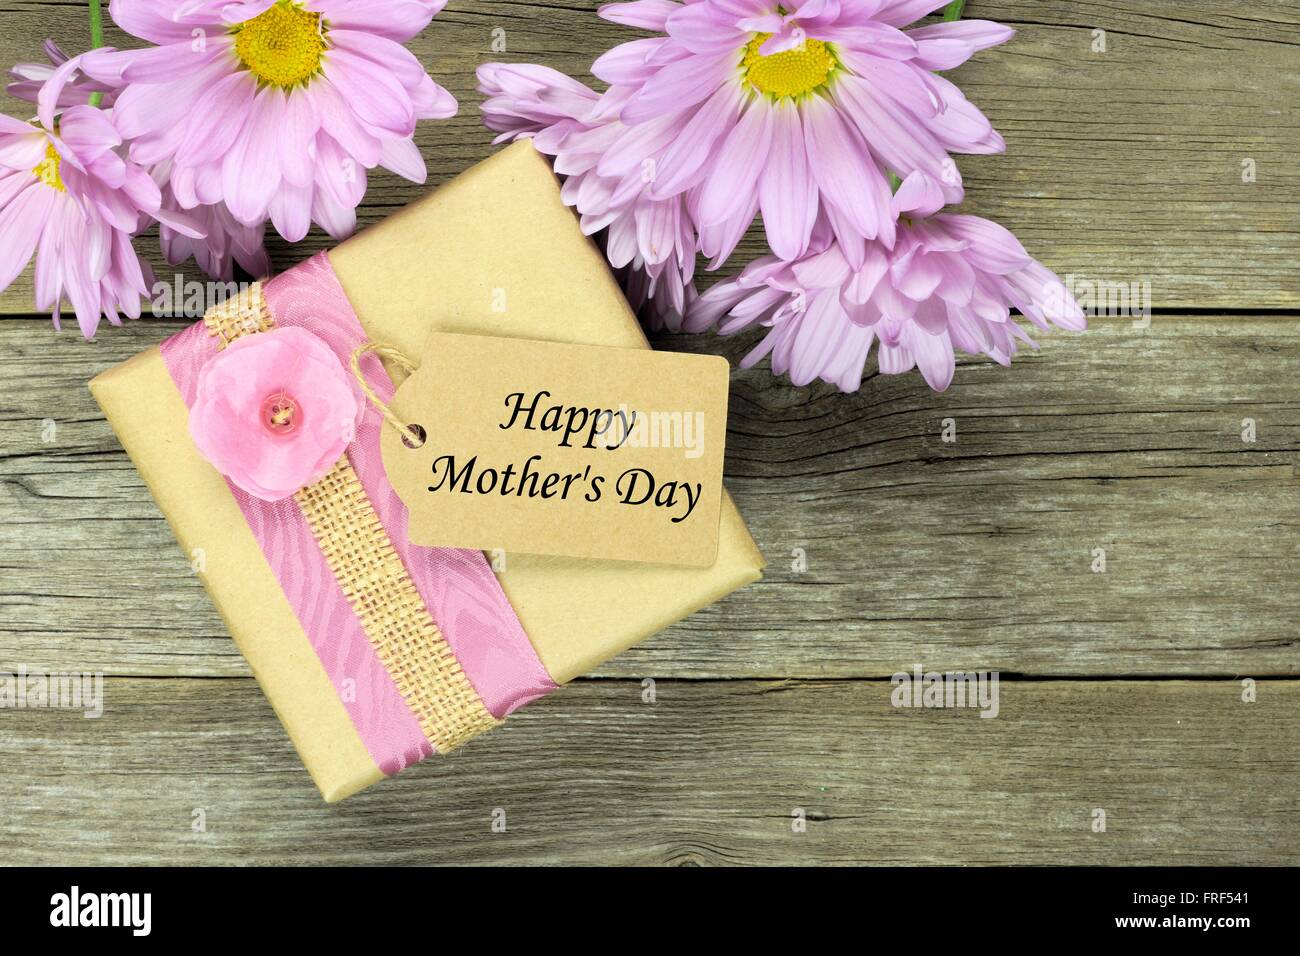 Gift box with Happy Mothers Day tag on rustic wood background with soft purple daisies Stock Photo